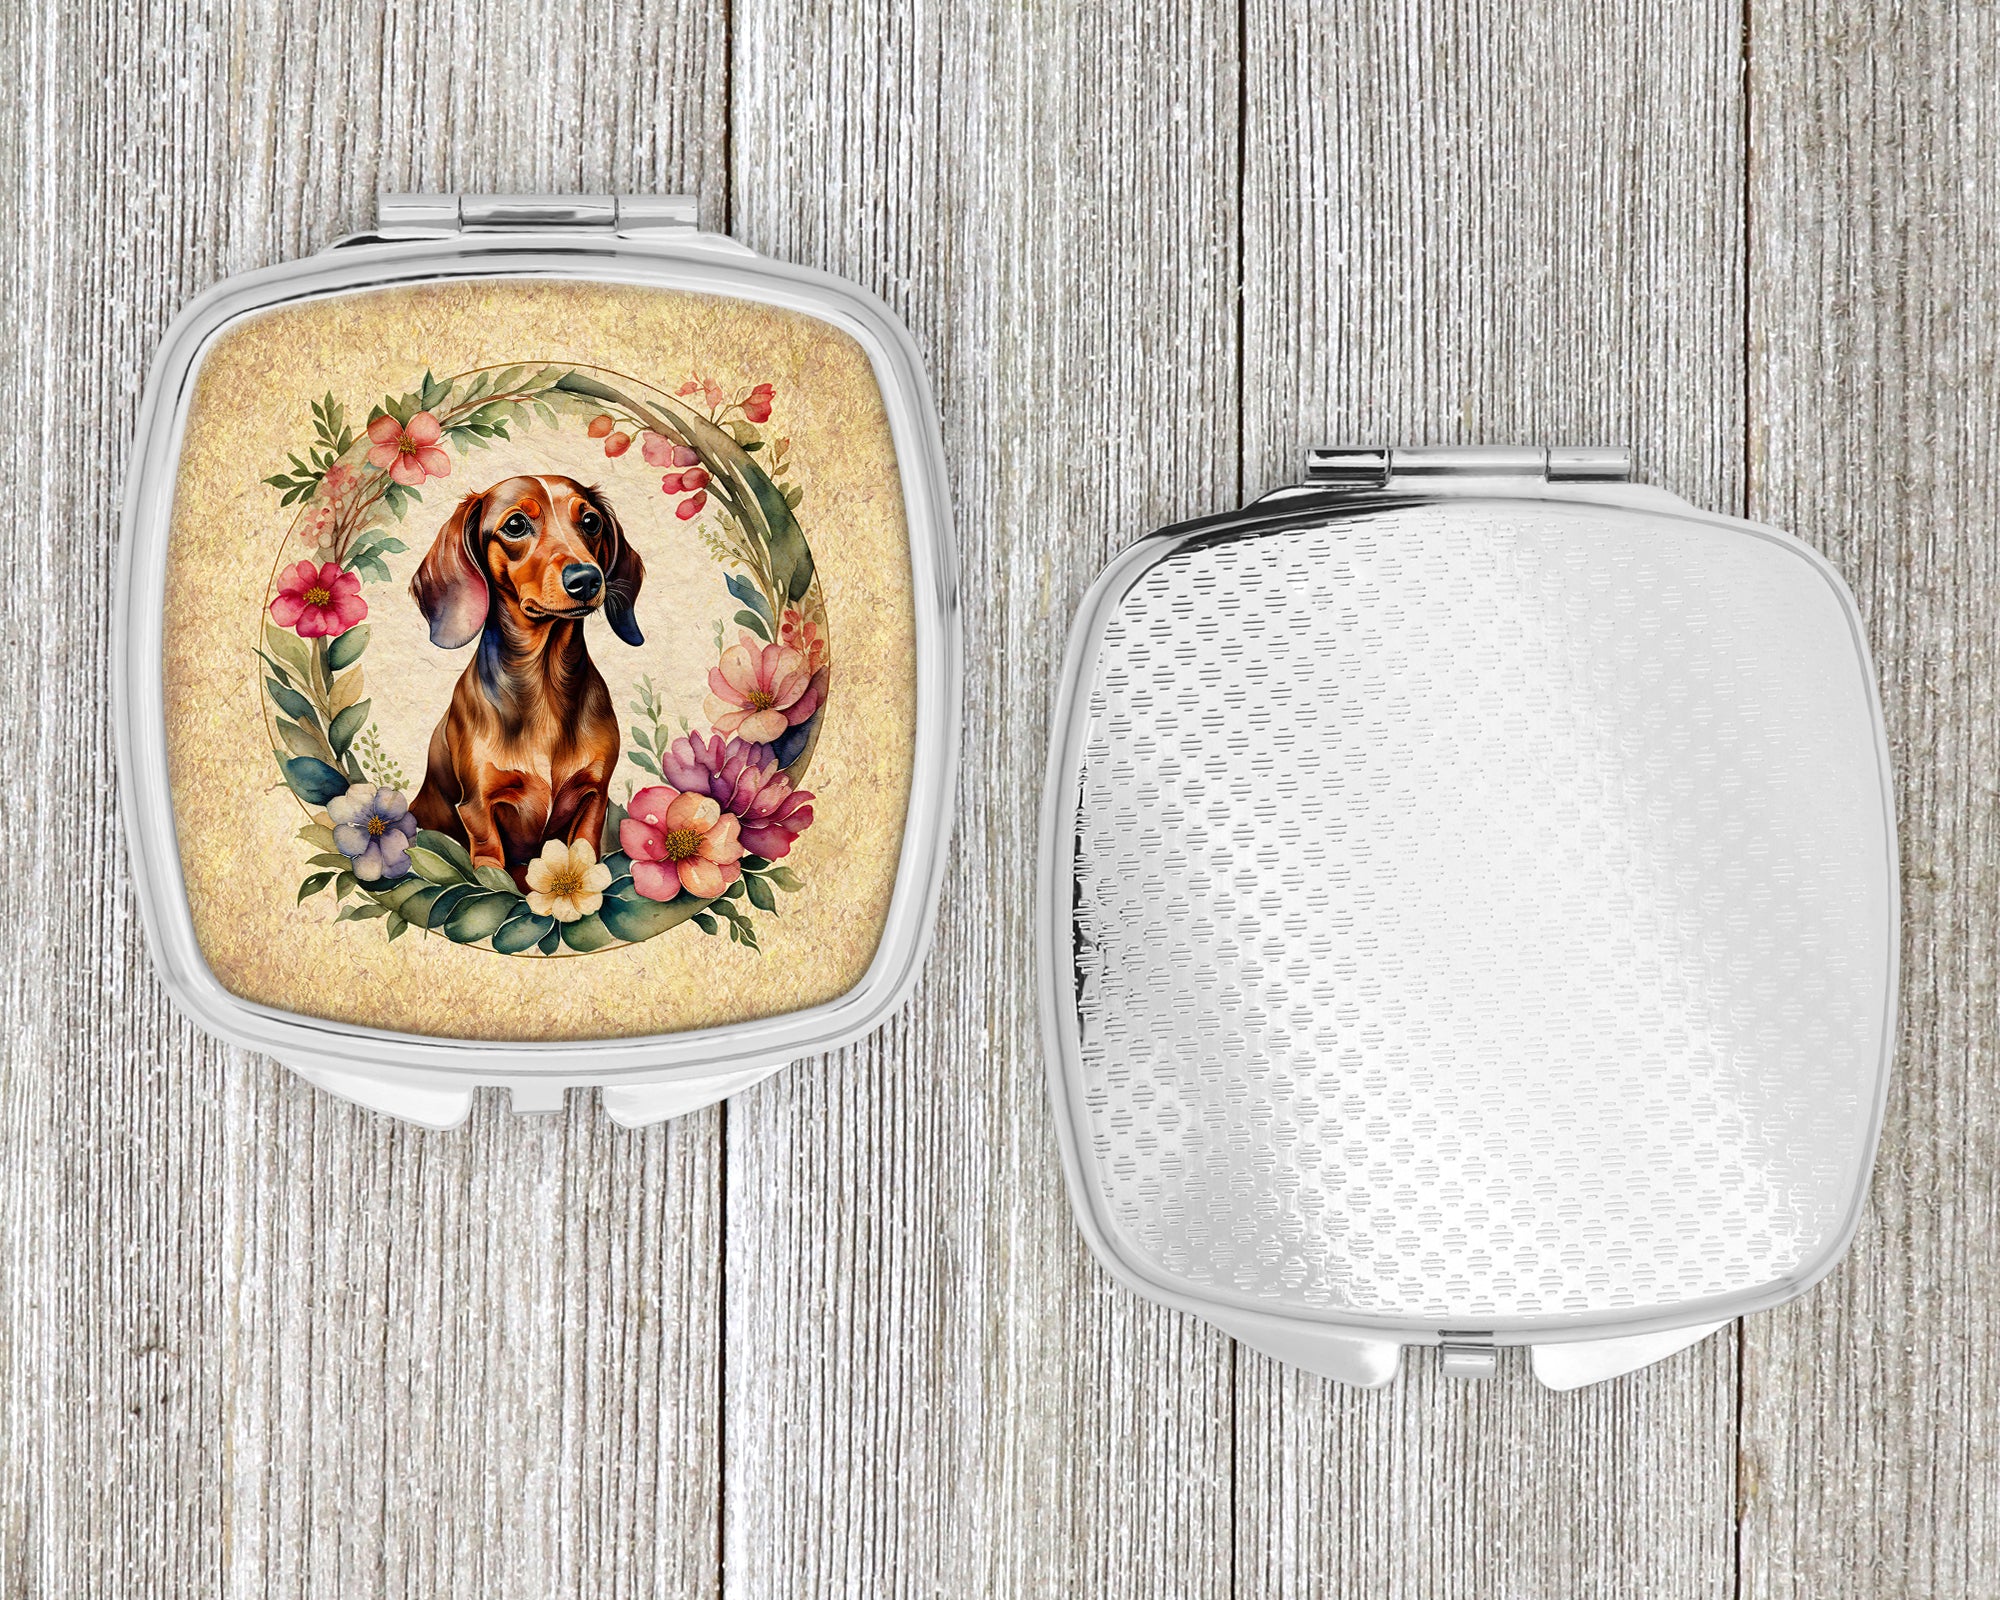 Dachshund and Flowers Compact Mirror